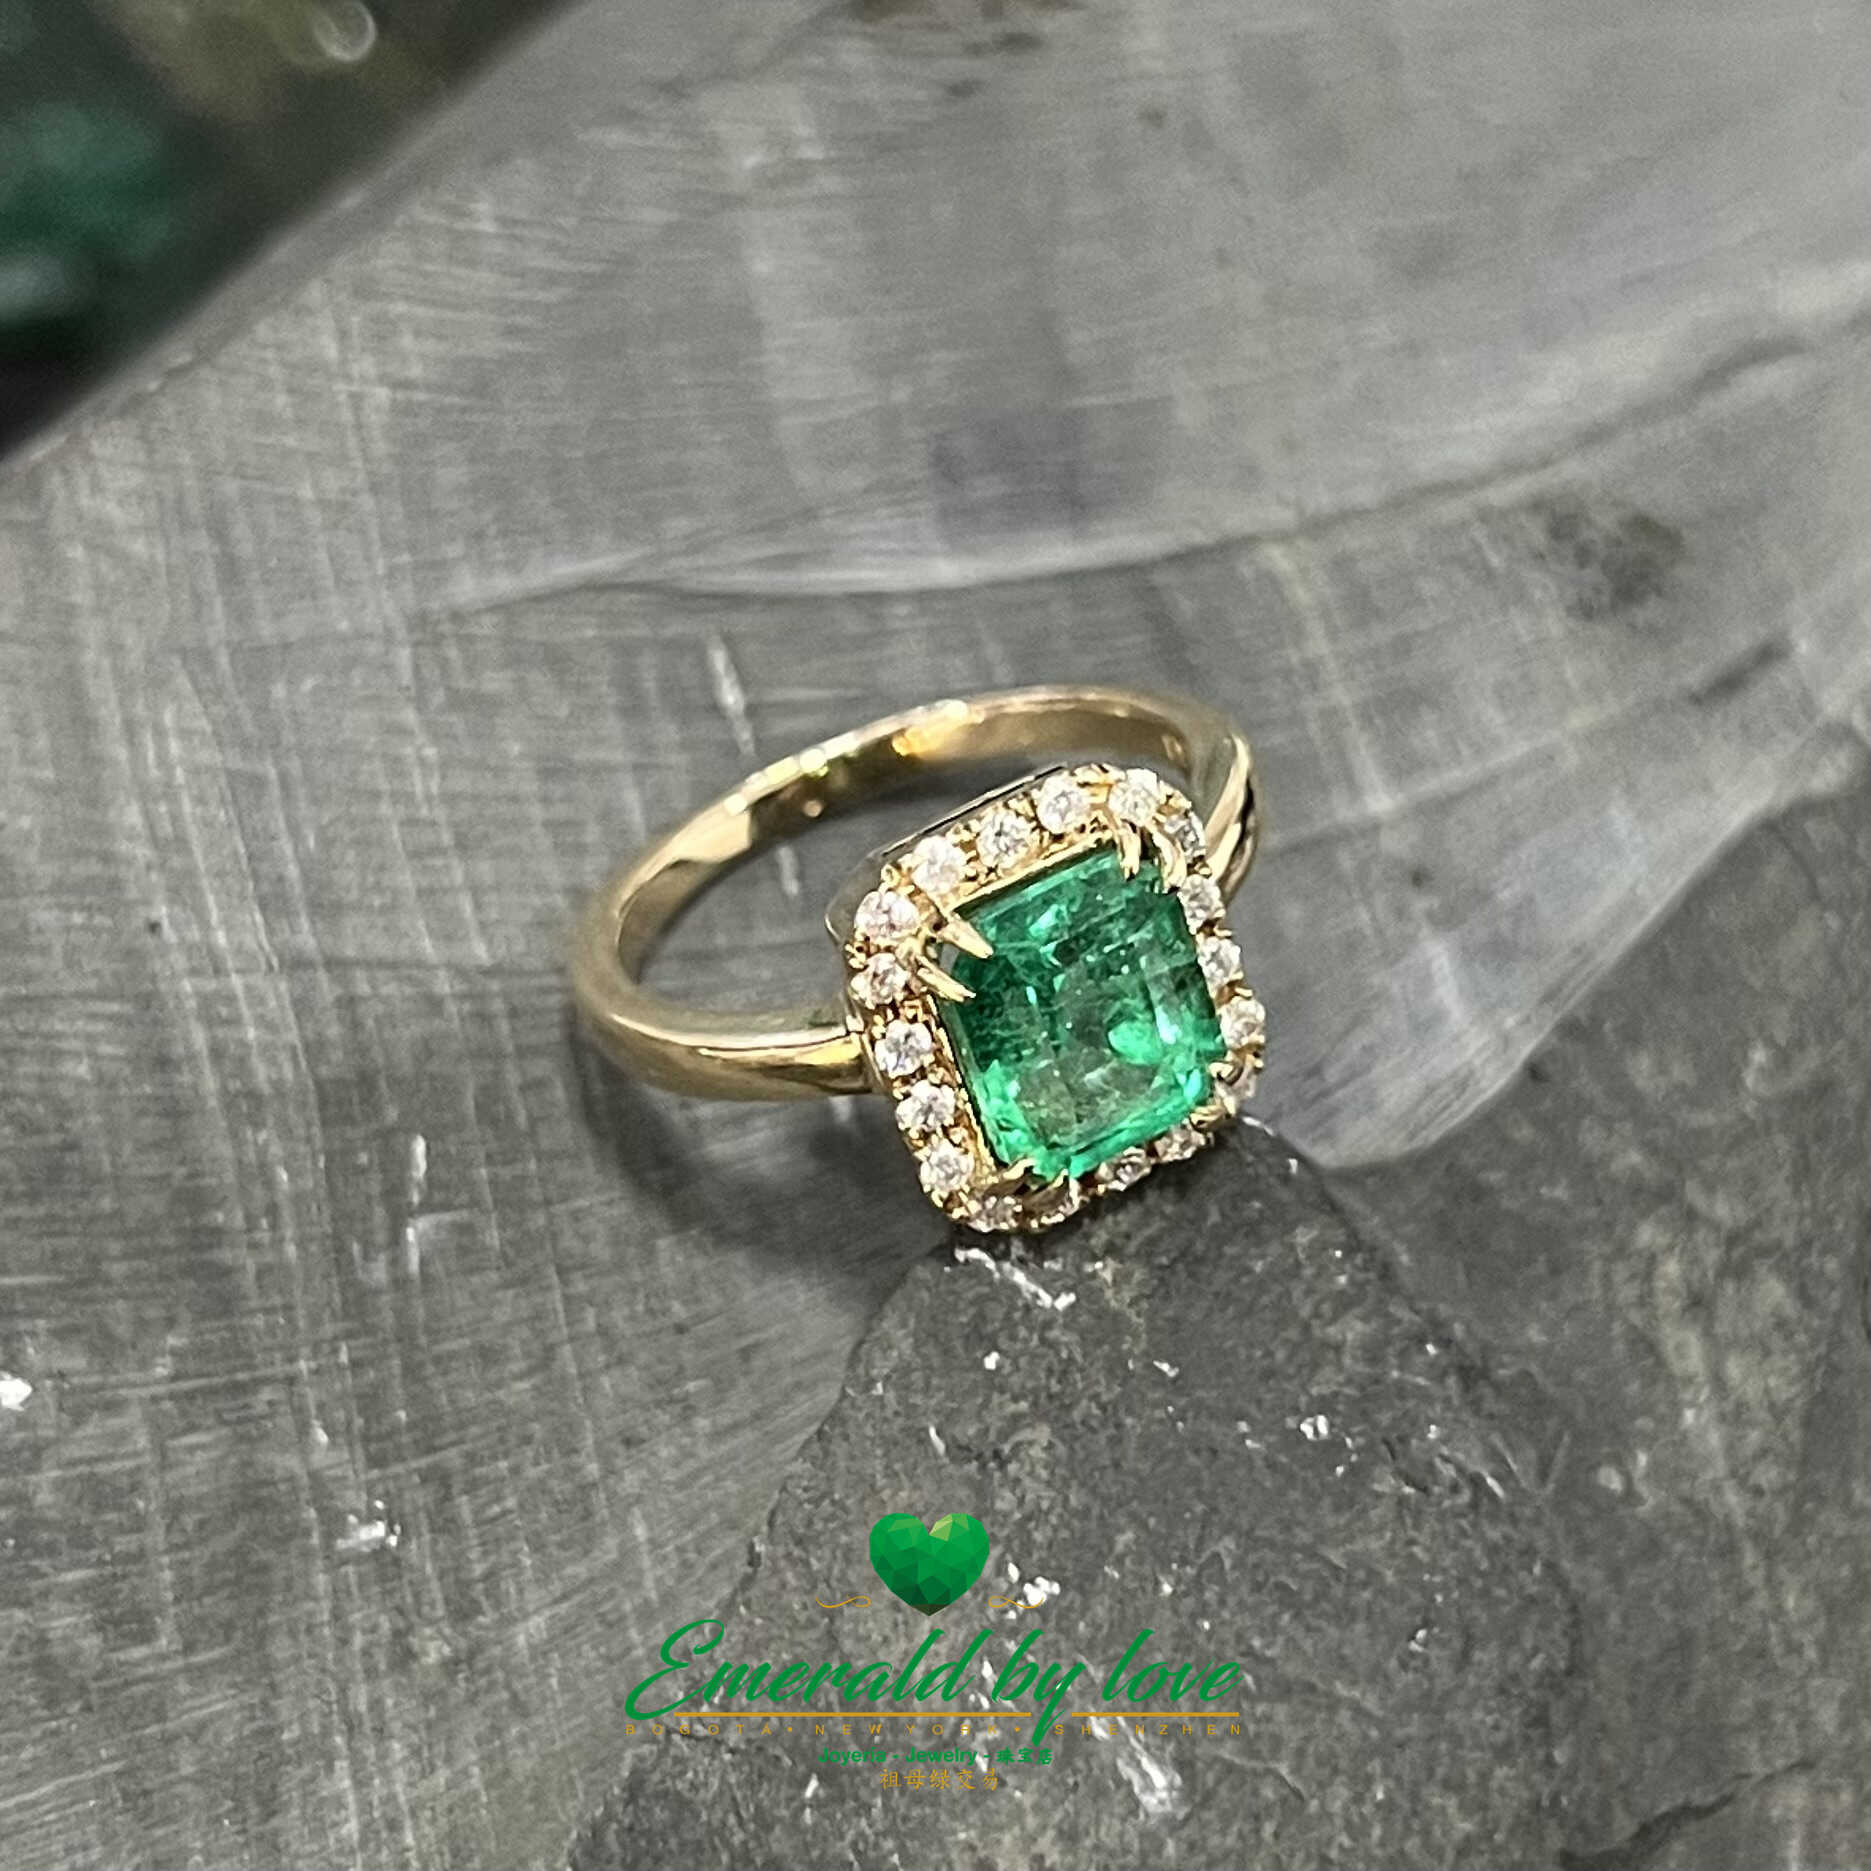 Emerald Engagement Ring: 2.1 CT Center Stone Surrounded by Diamonds